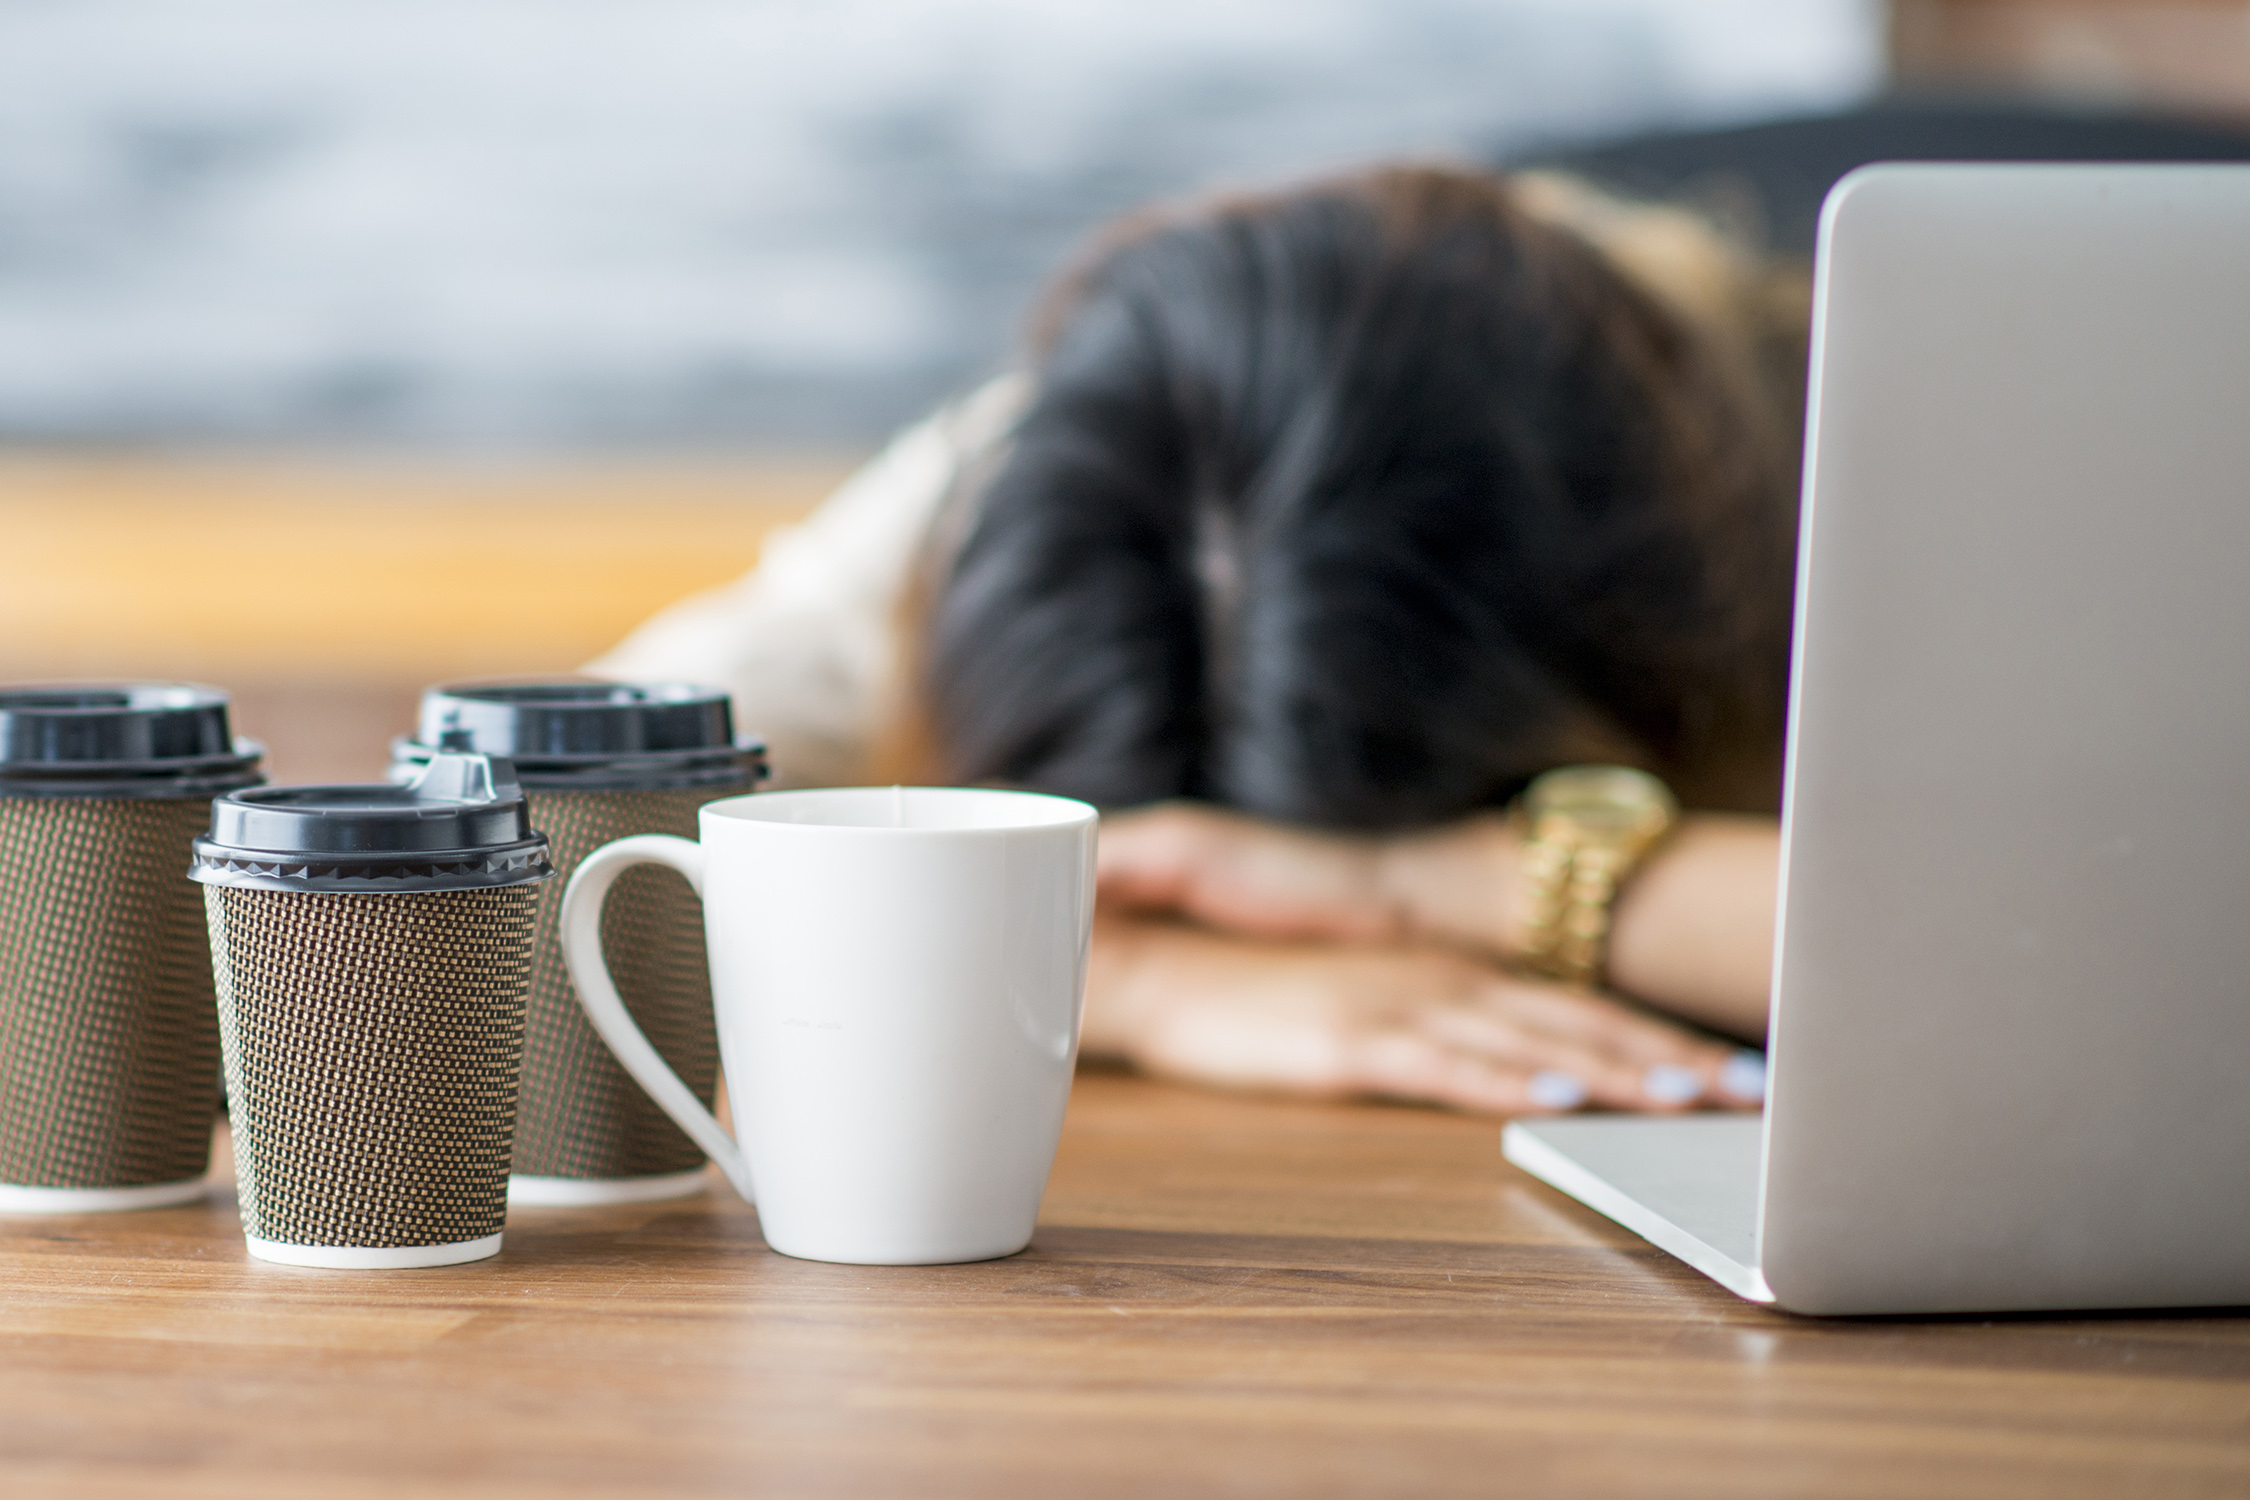 Exhausted female sleeps with her head on her desk, flanked by a laptop and multiple disposable coffee cups